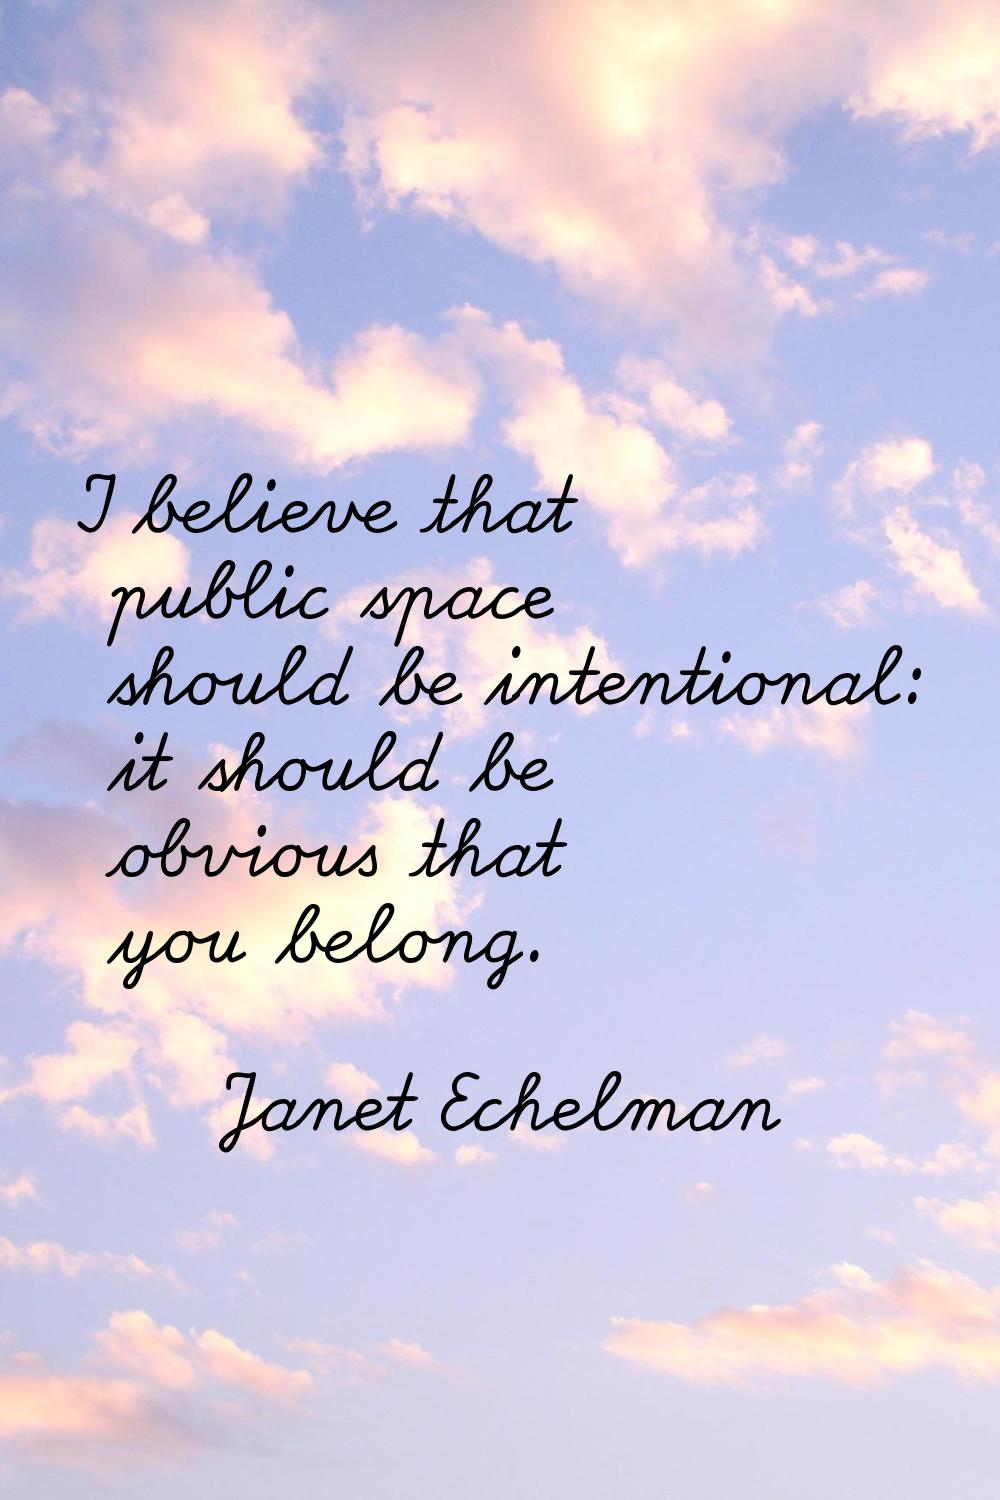 I believe that public space should be intentional: it should be obvious that you belong.